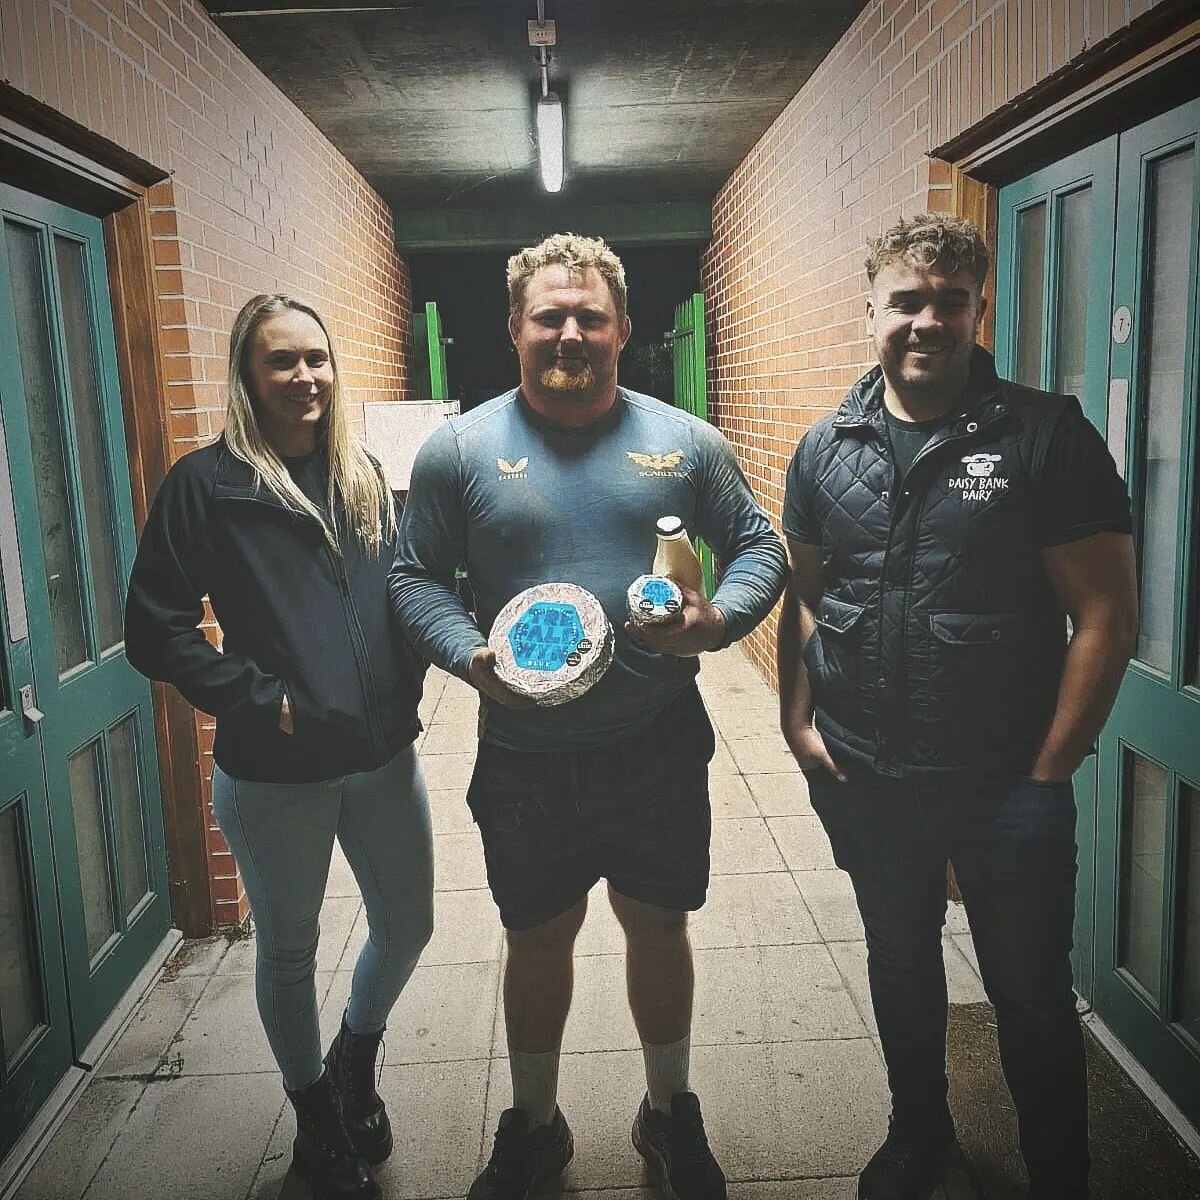 Celebrating retirement 👏🏼
.
Absolutely awesome to catch up again with ex welsh rugby legend samson Lee, over at our new cheese facilities, after recently announcing his retirement. 
.
Congratulations on such a spectacular career, and good luck with